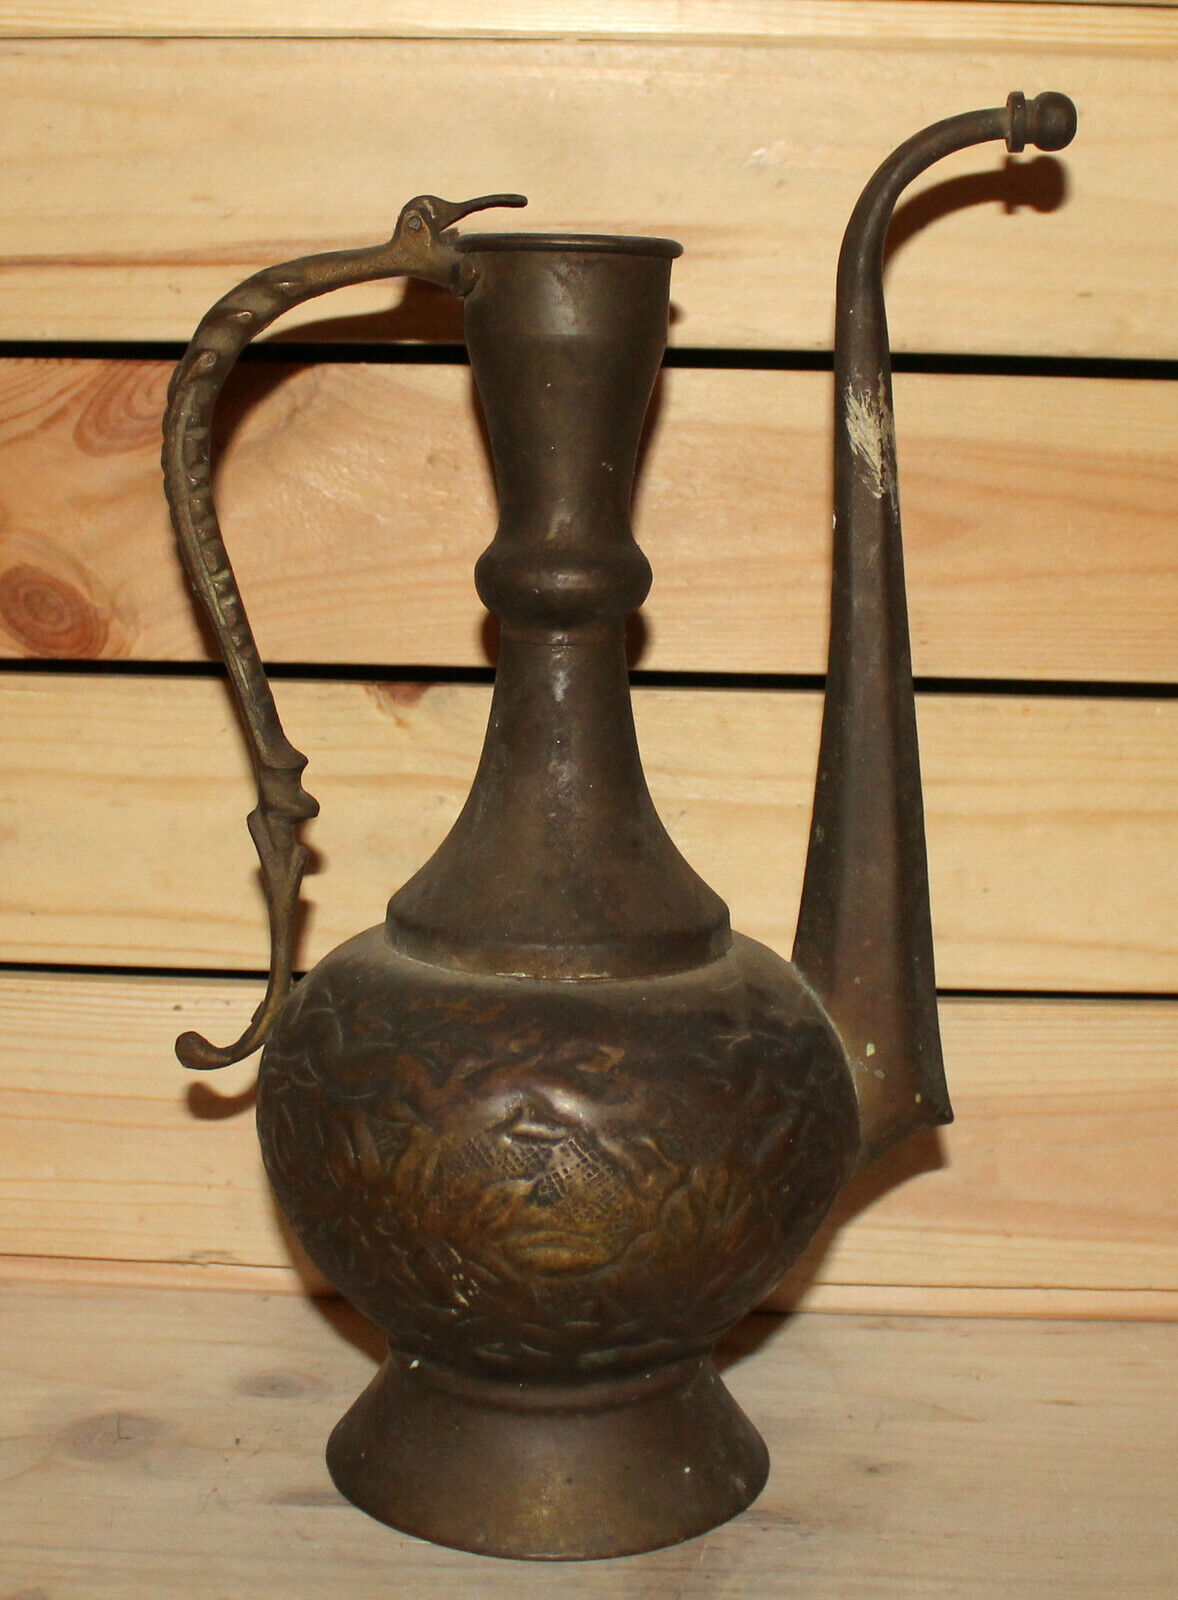 Antique Islamic hand made bronze pitcher teapot with spout